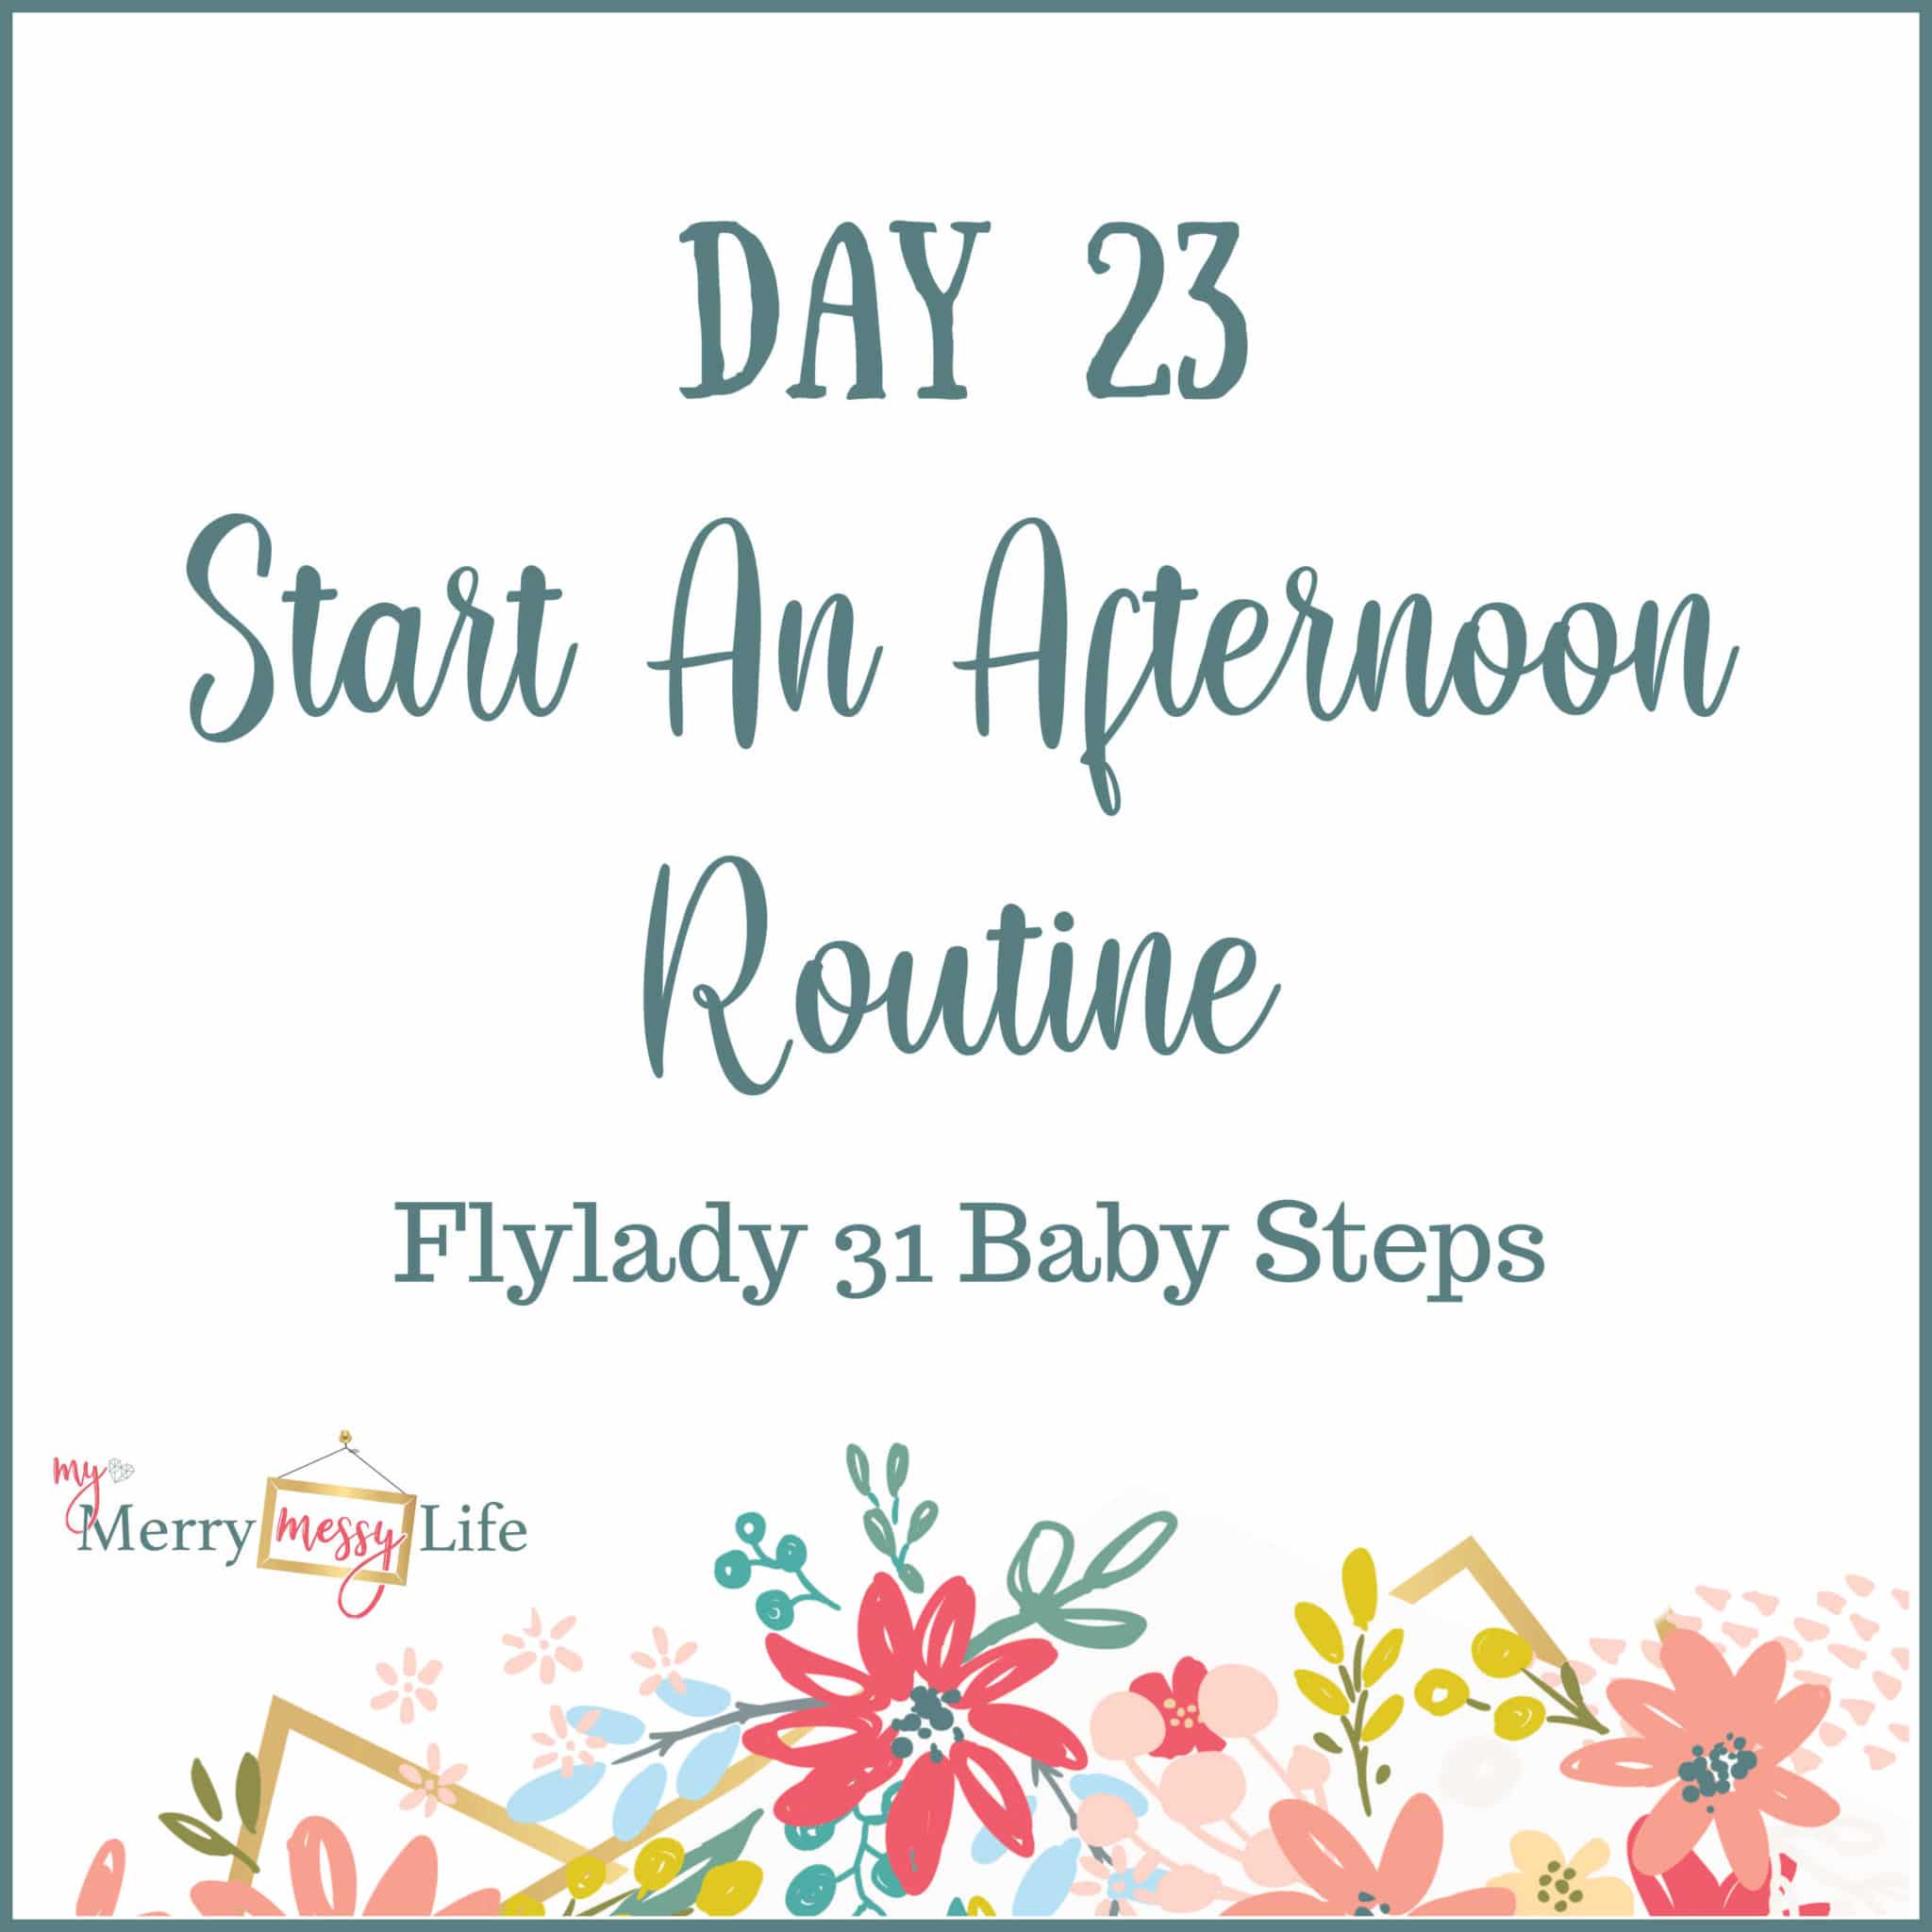 Flylady 31 Baby Steps - Day 23 - Start an Afternoon Routine